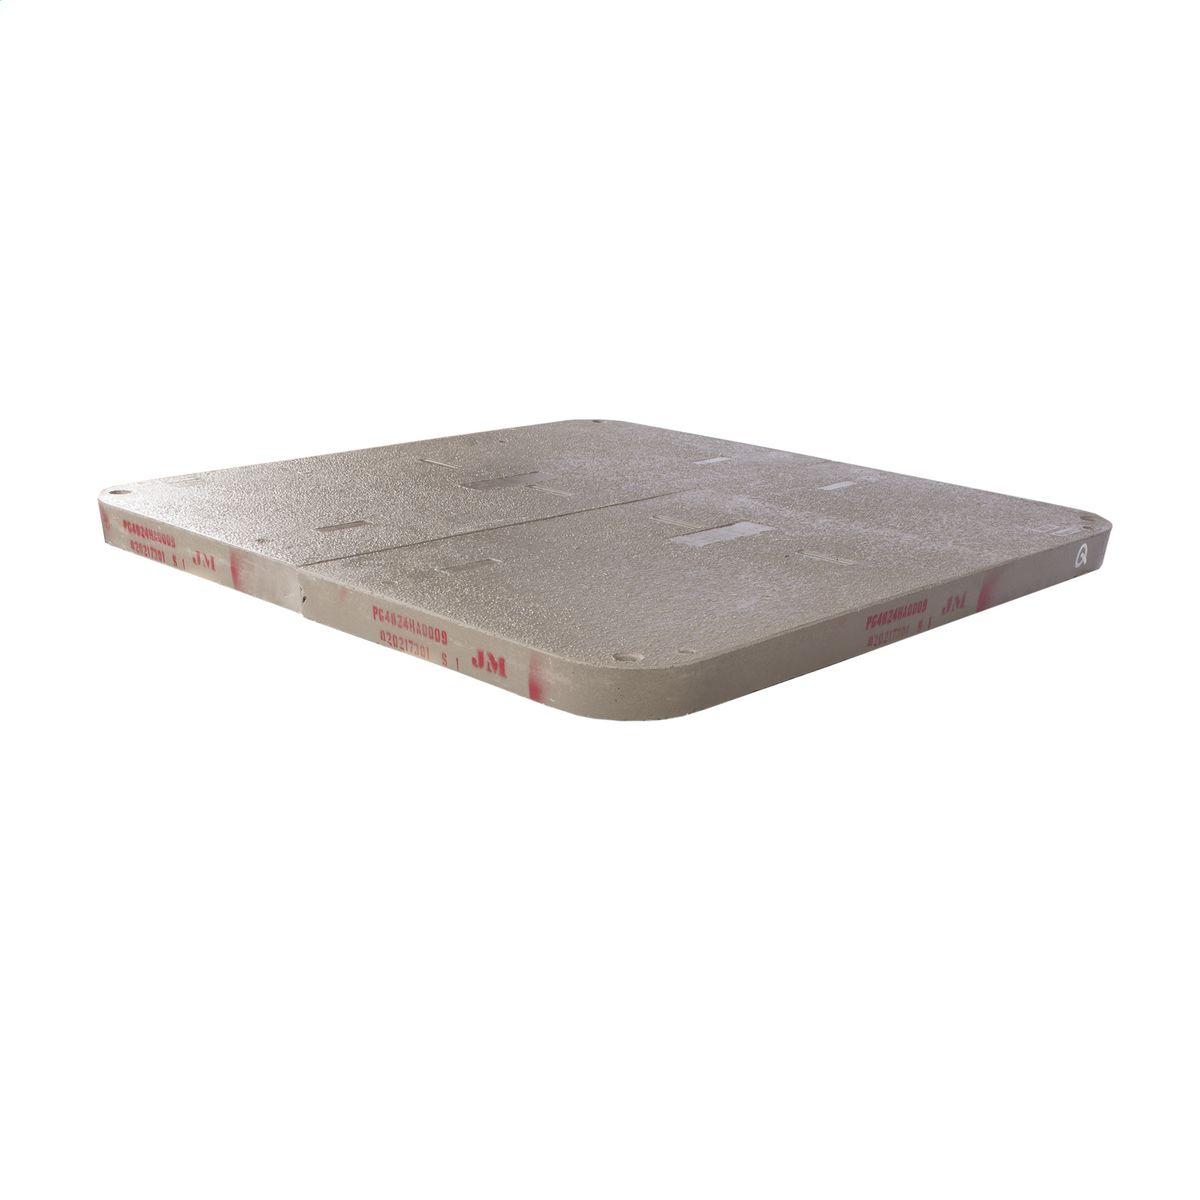 Hubbell PG3660HH0017 Cover, Polymer Concrete, Extra Heavy Duty Tier 22, 36"x60"x3", 2-piece w/ 2 Bolts, Electric Logo 